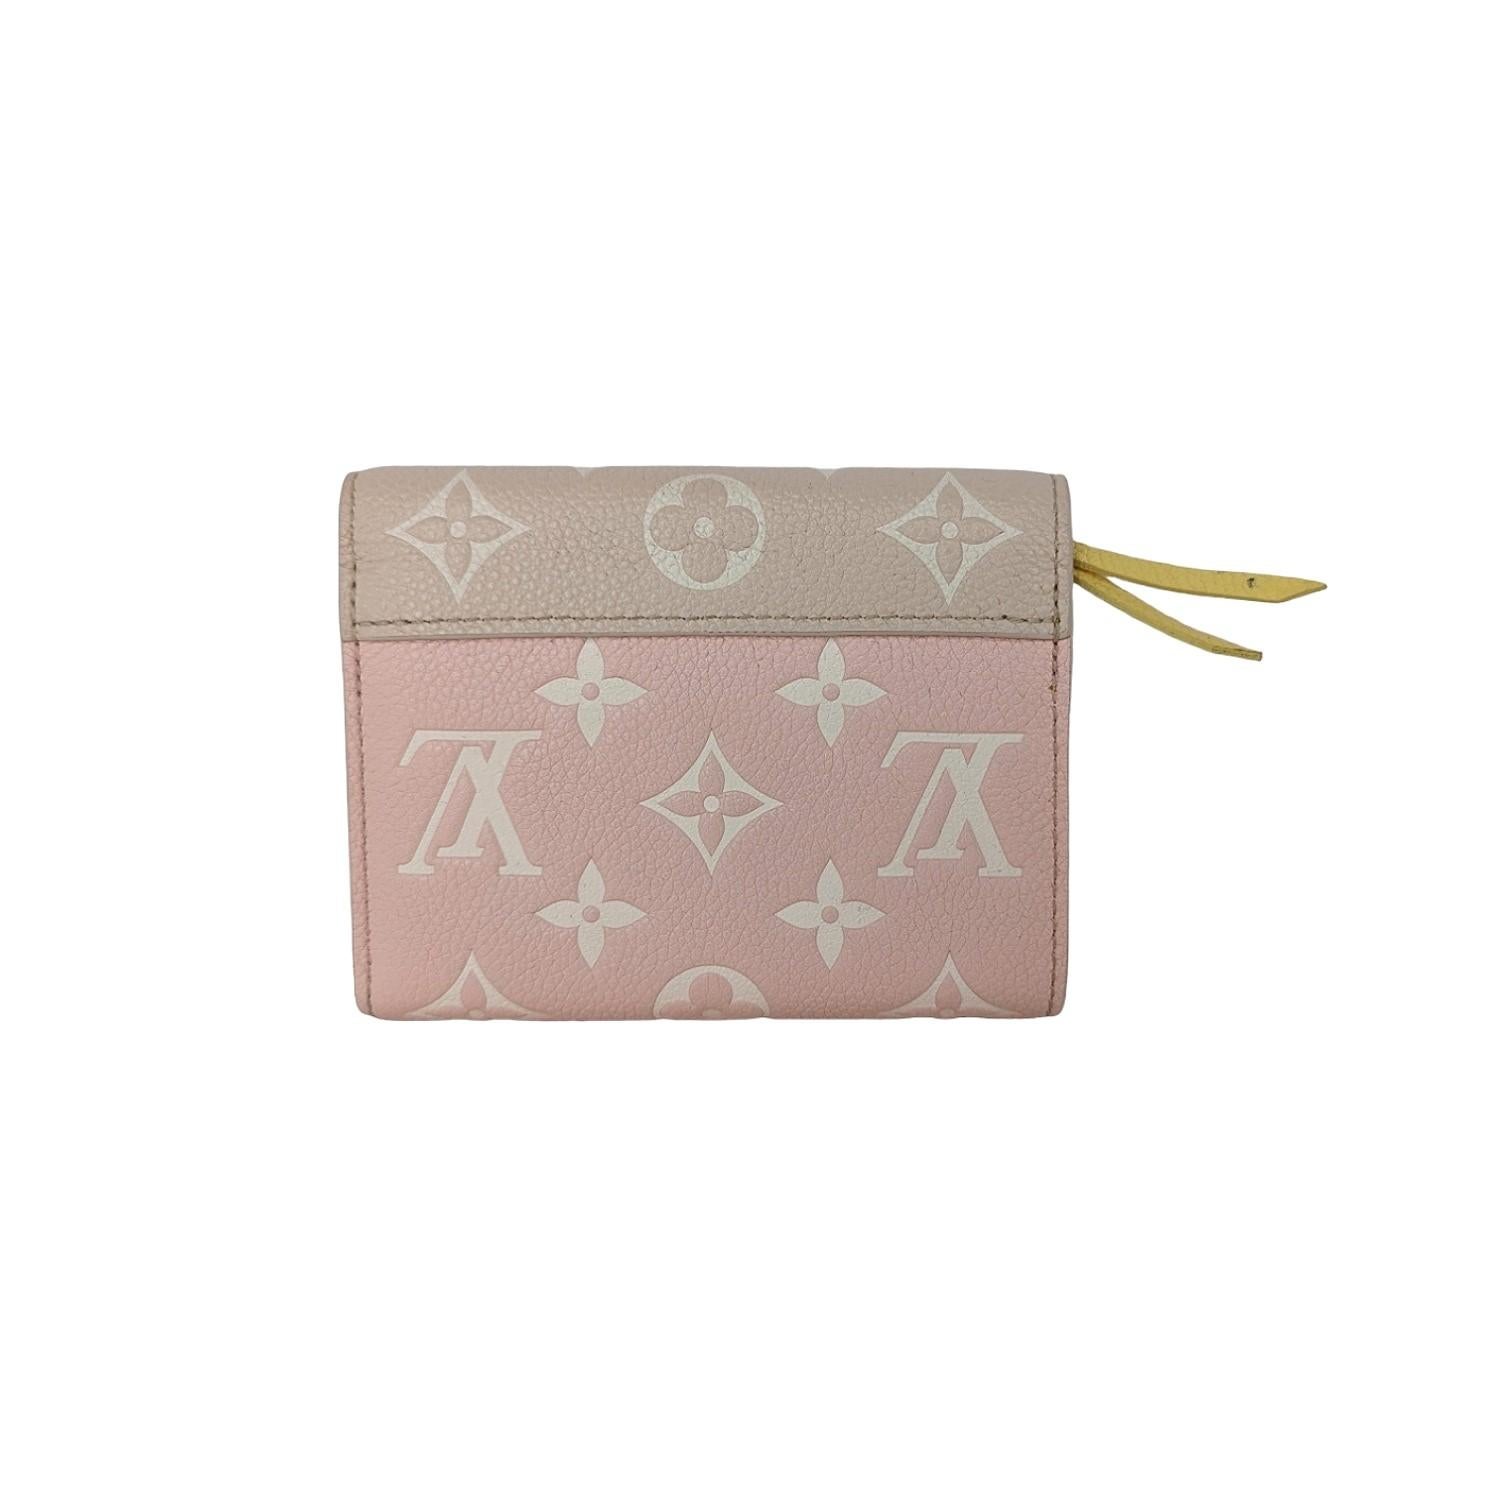 Louis Vuitton Empreinte Monogram Spring in the City Victorine Wallet in Pink, Beige and Yellow. This pre-owned luxury wallet is part of the Louis Vuitton Spring 2022 “Spring in the City” collection. This limited edition wallet is crafted of Louis